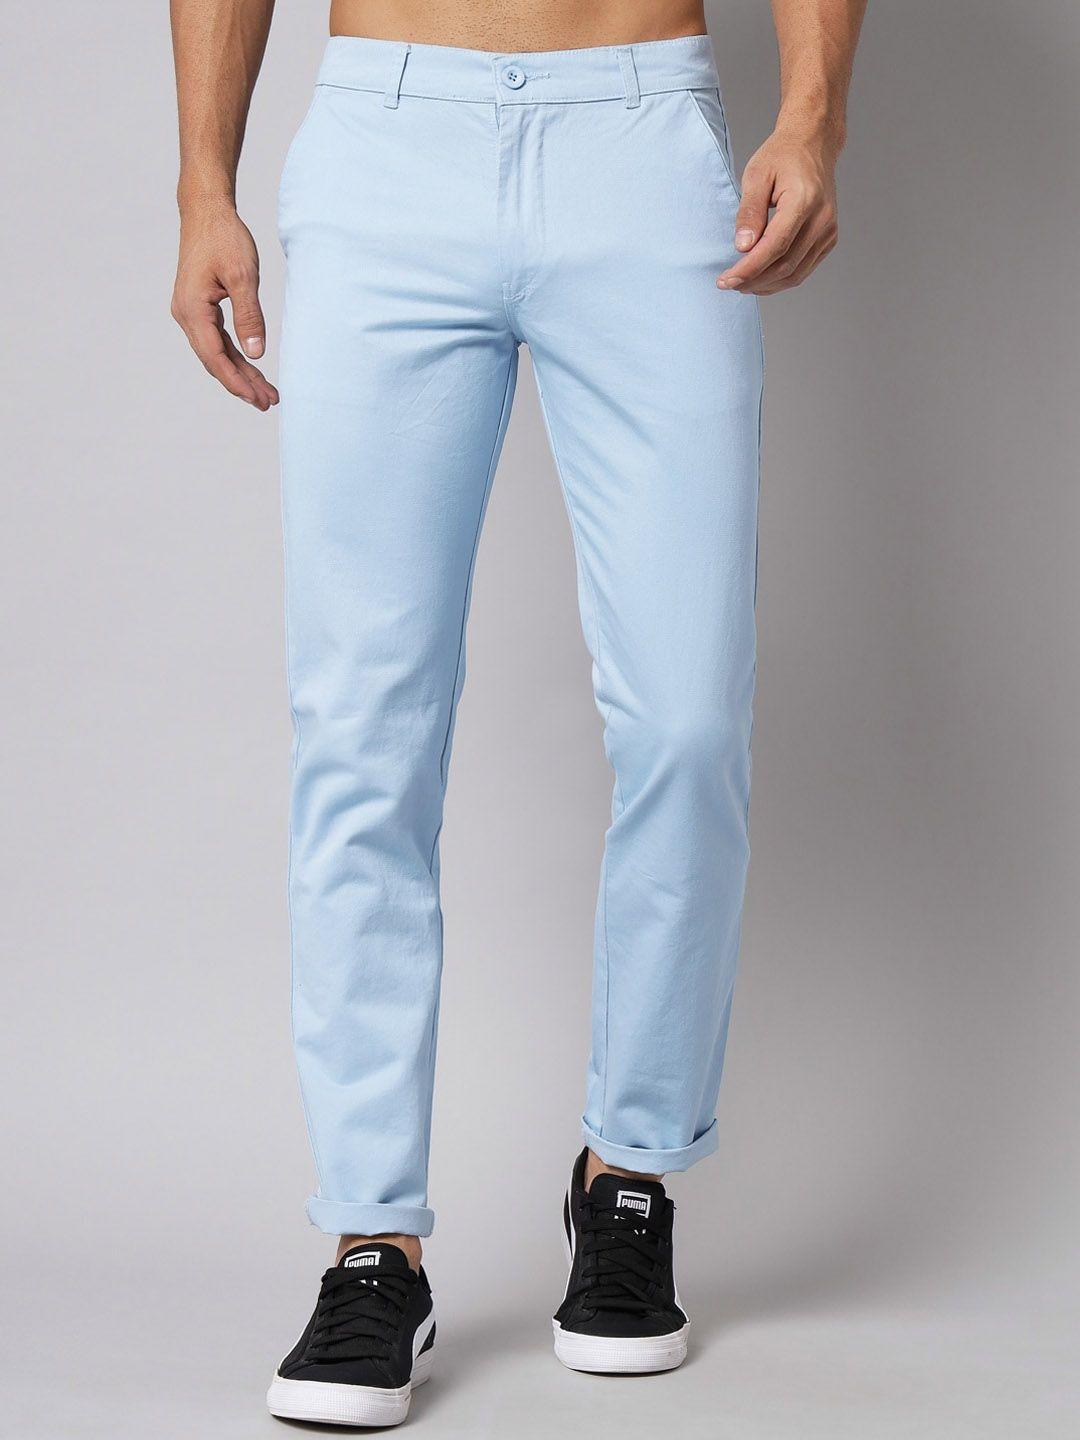 studio nexx men blue relaxed regular fit cotton chinos trousers